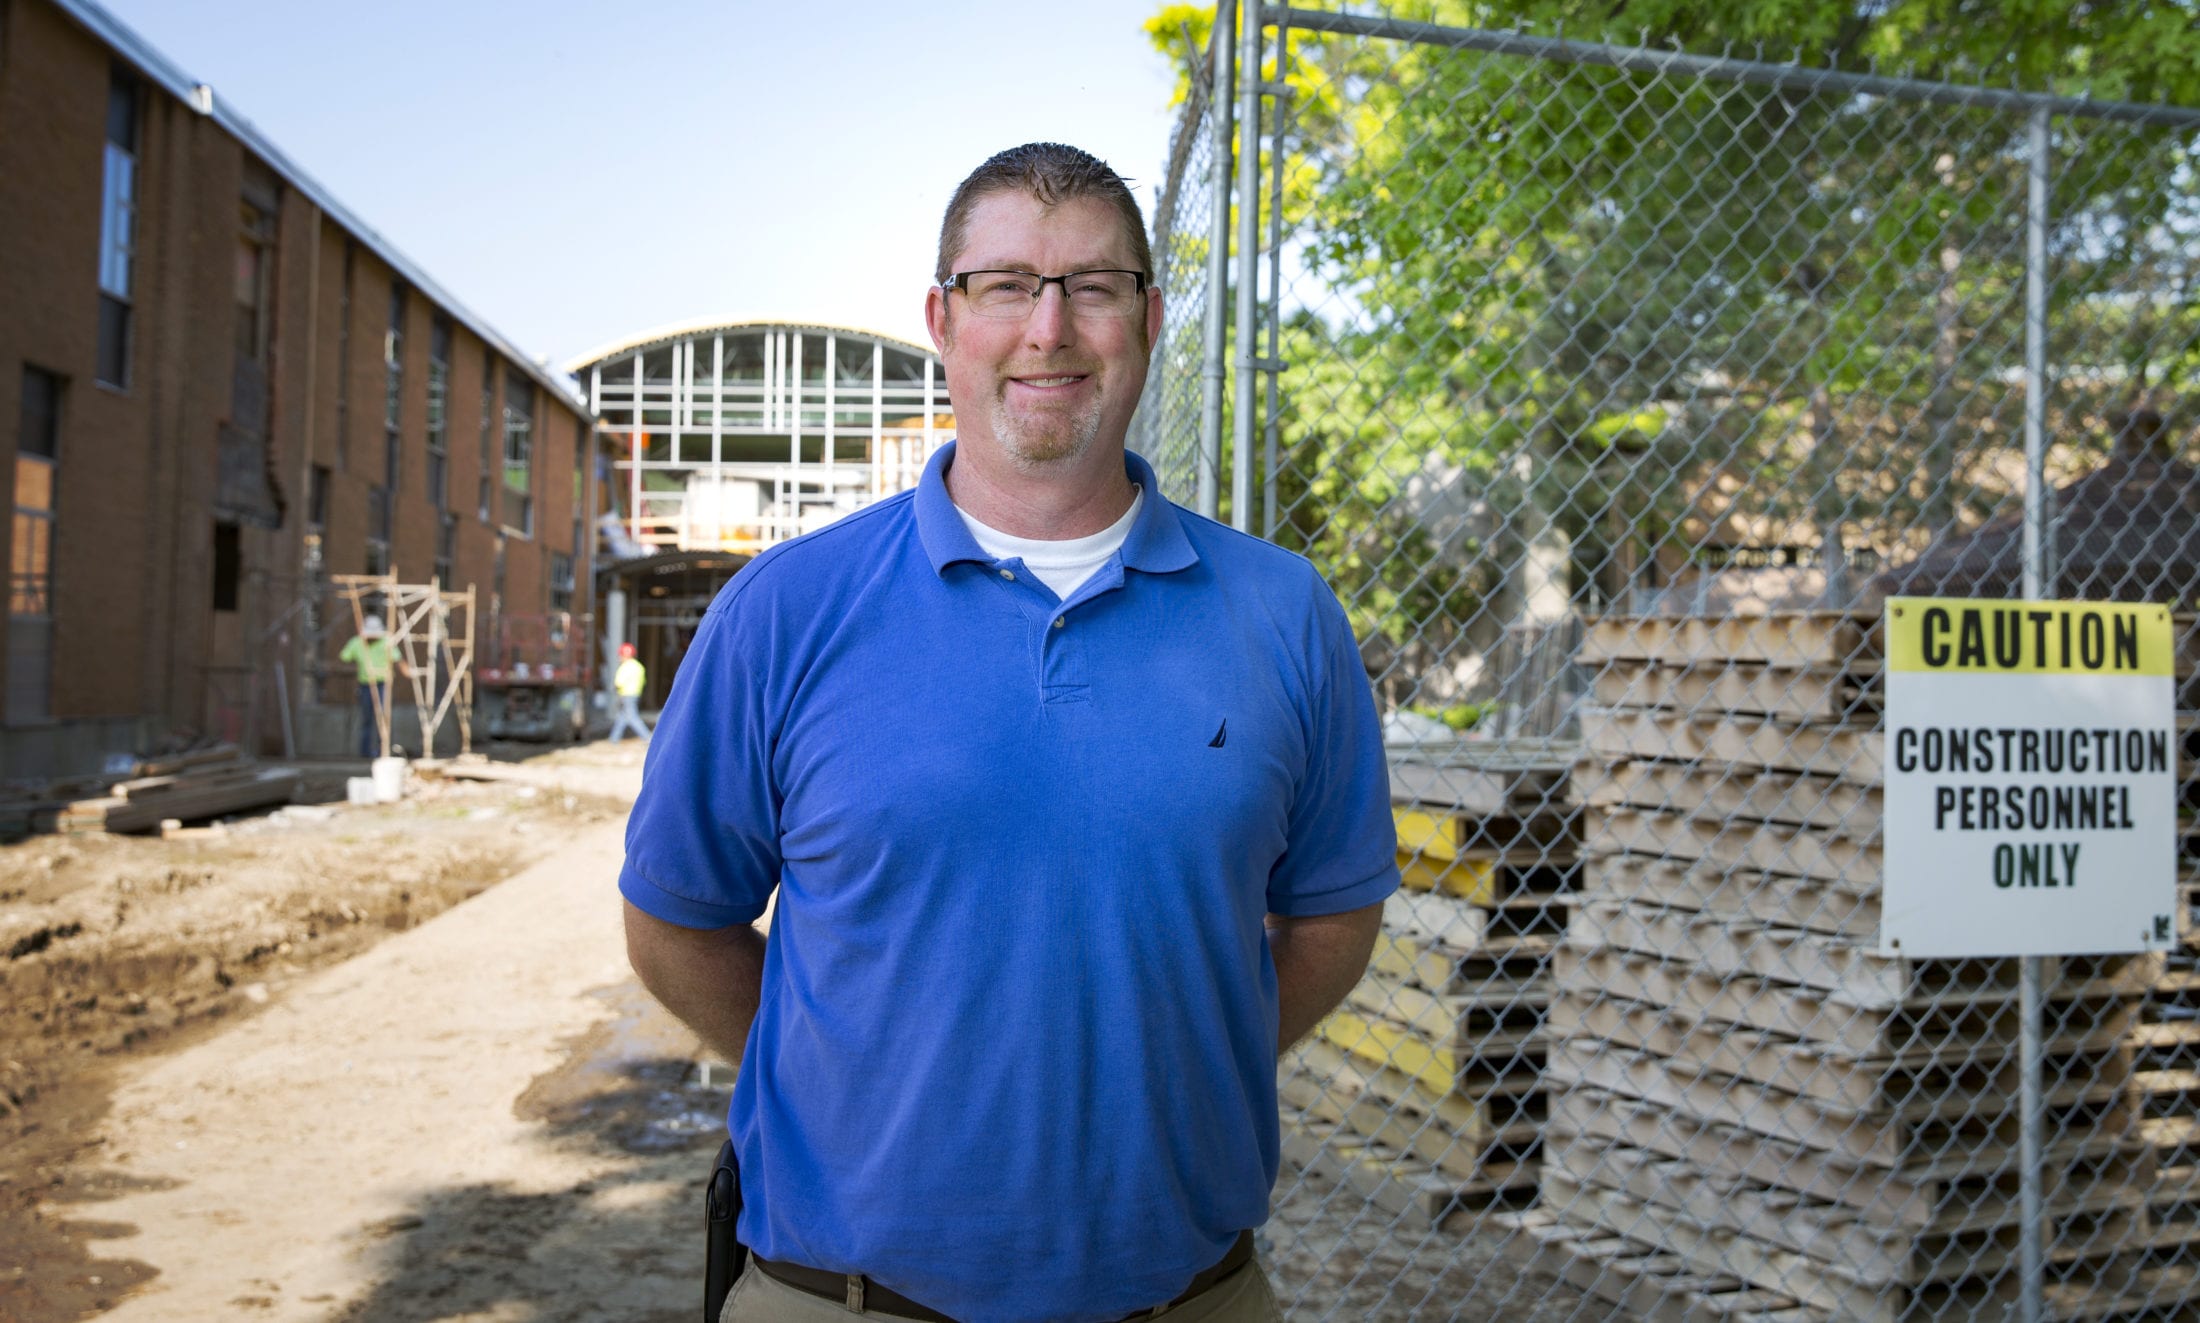 Building his Bachelor’s: Mike pursues a degree in Civil Engineering Technology while balancing career and family